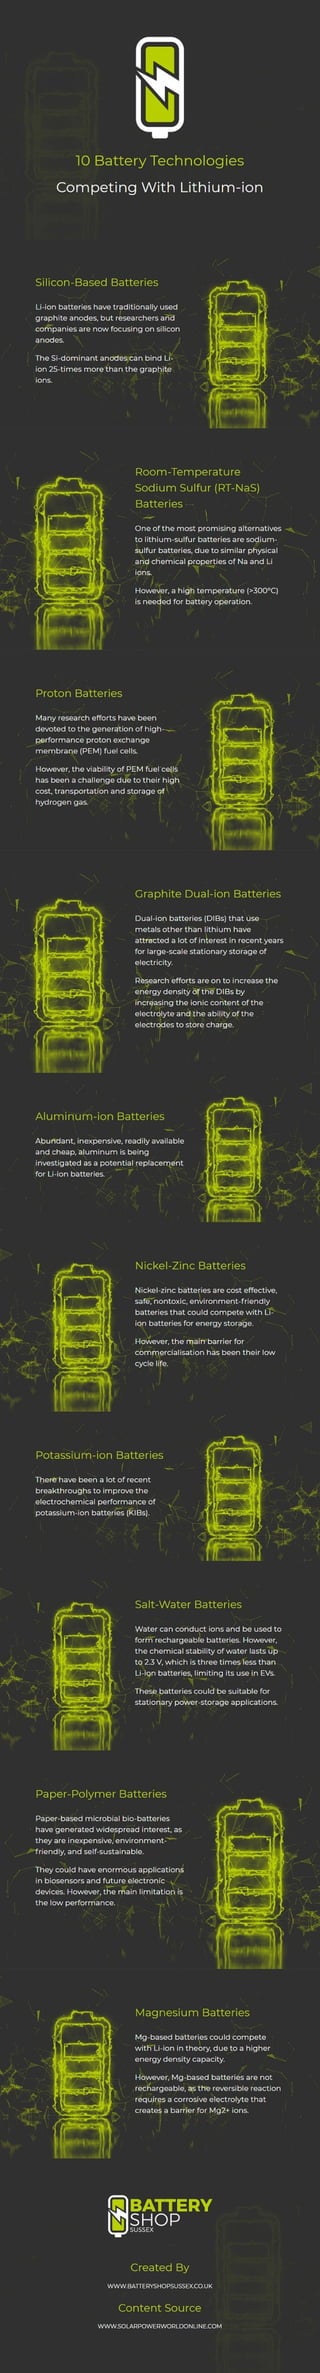 10 battery technologies competing with lithium ion